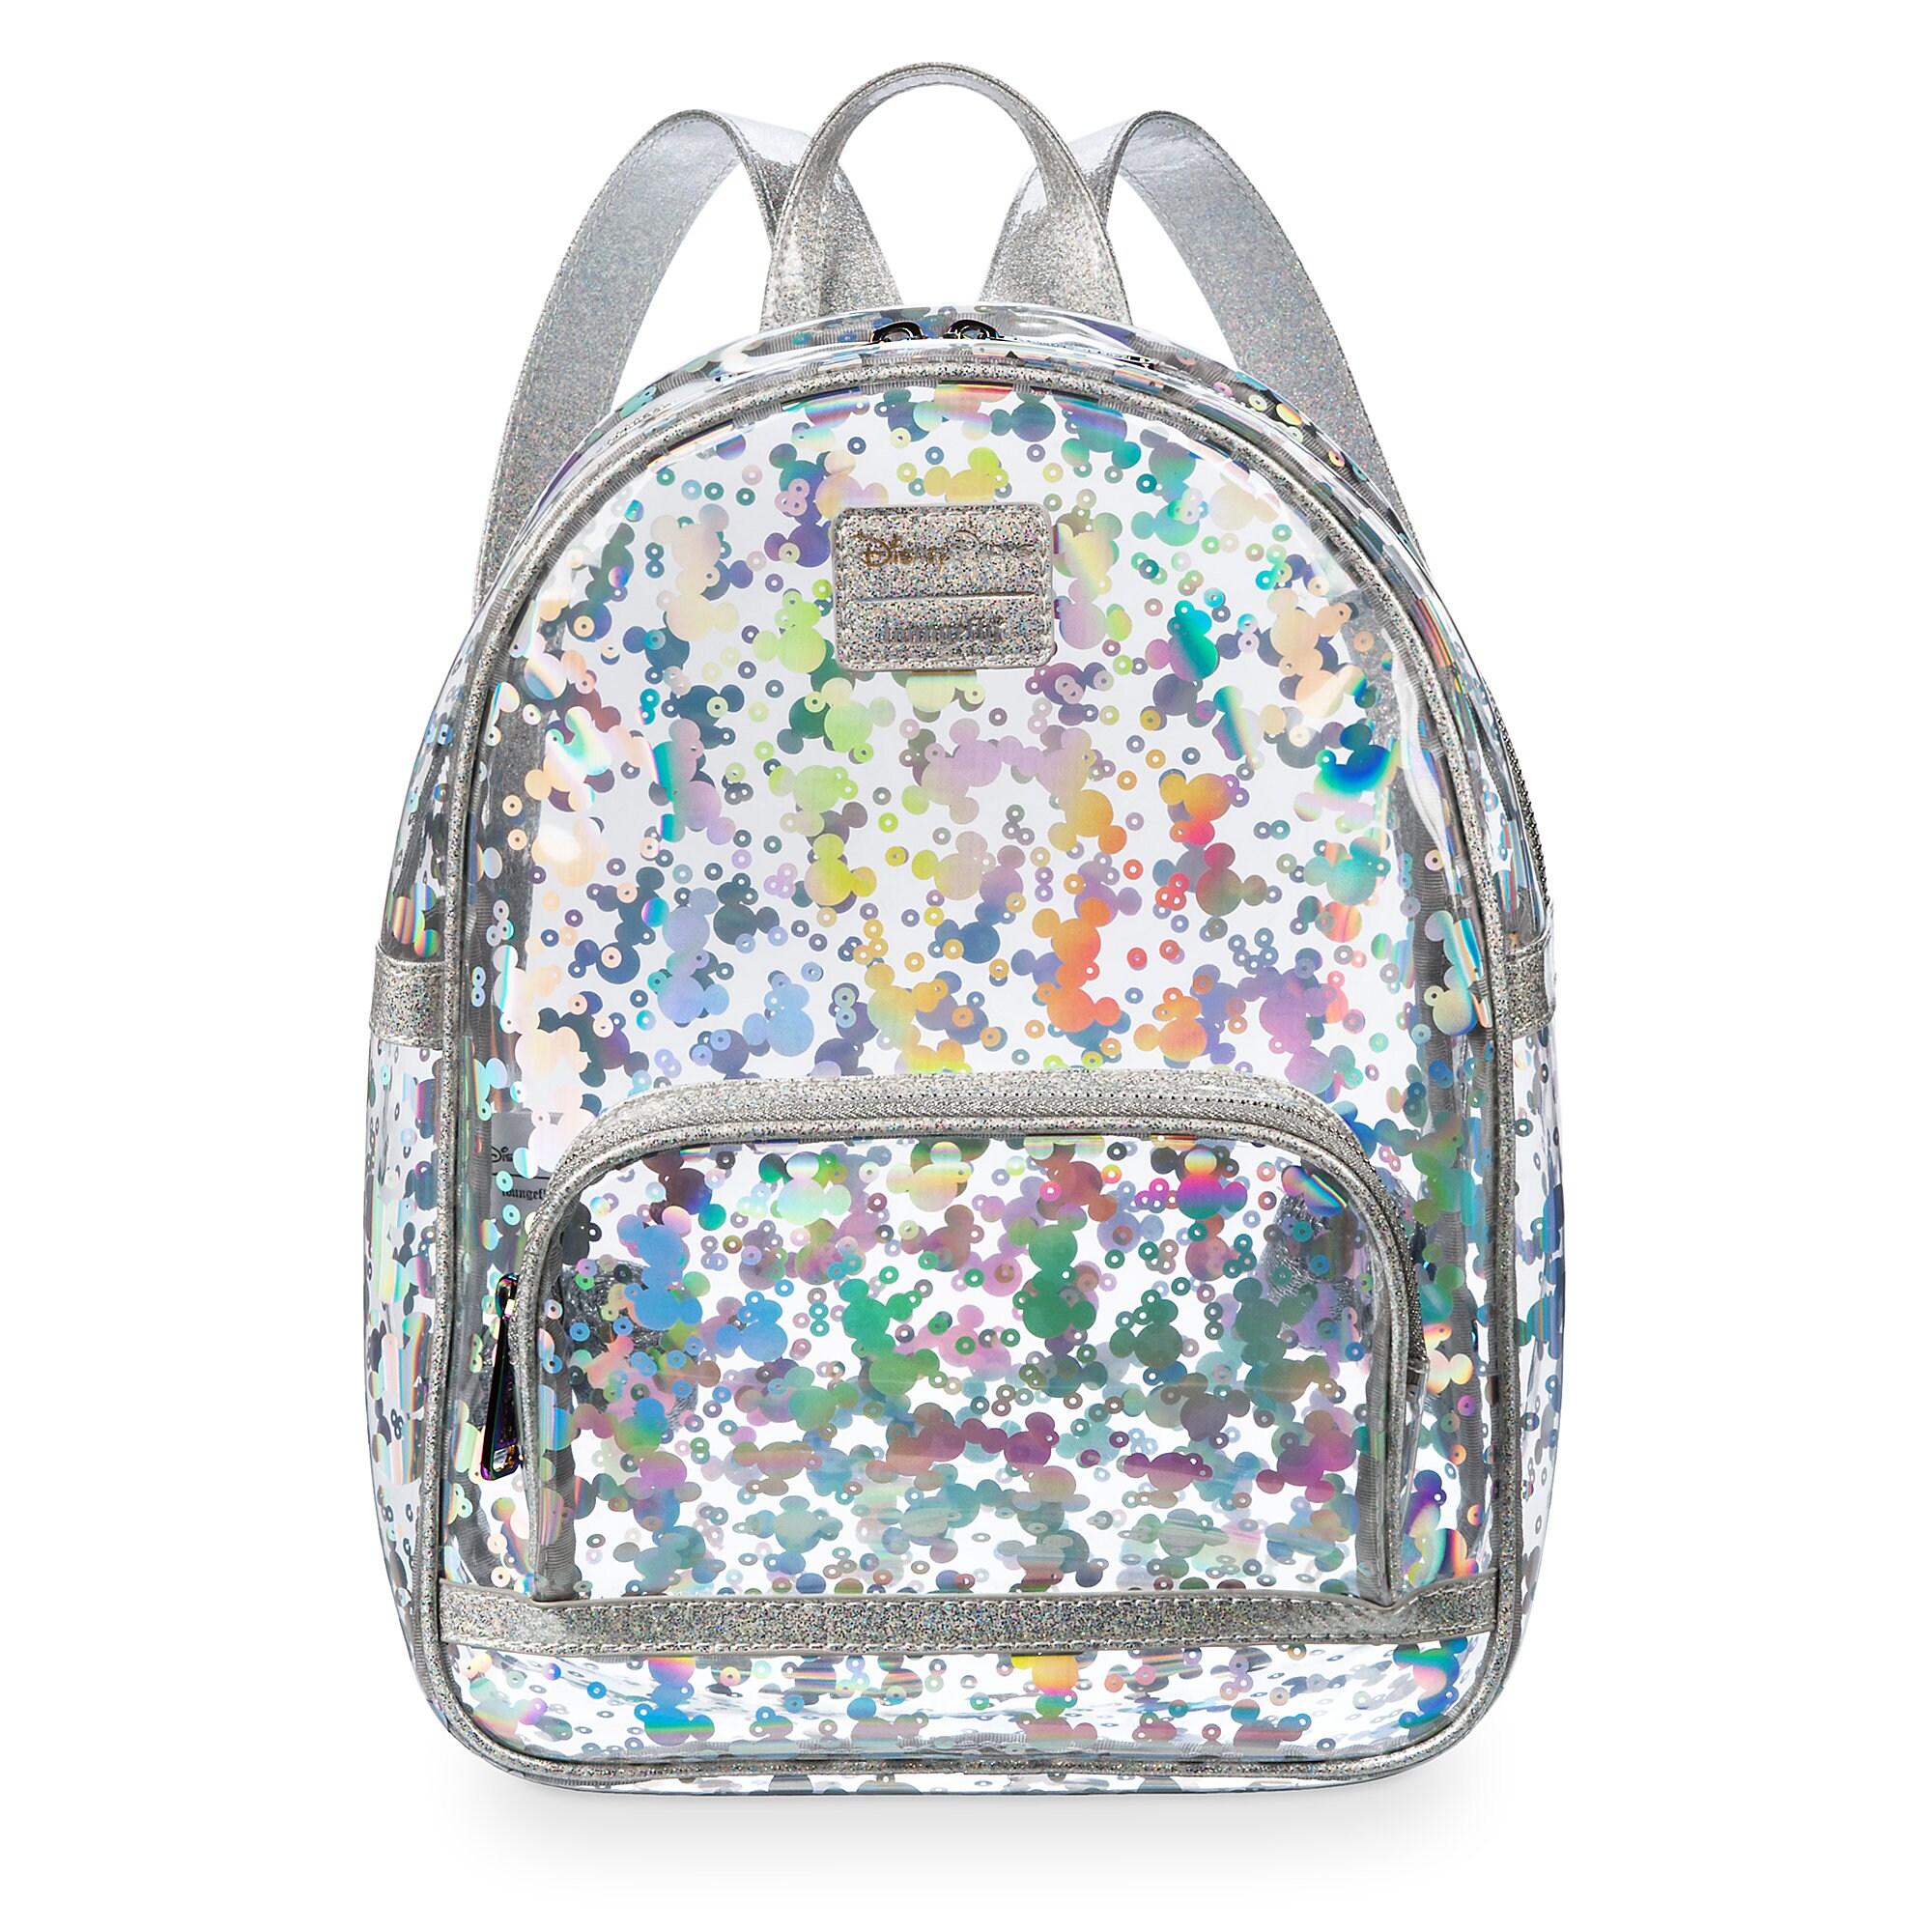 Mickey Mouse Magic Mirror Metallic Mini Backpack by Loungefly